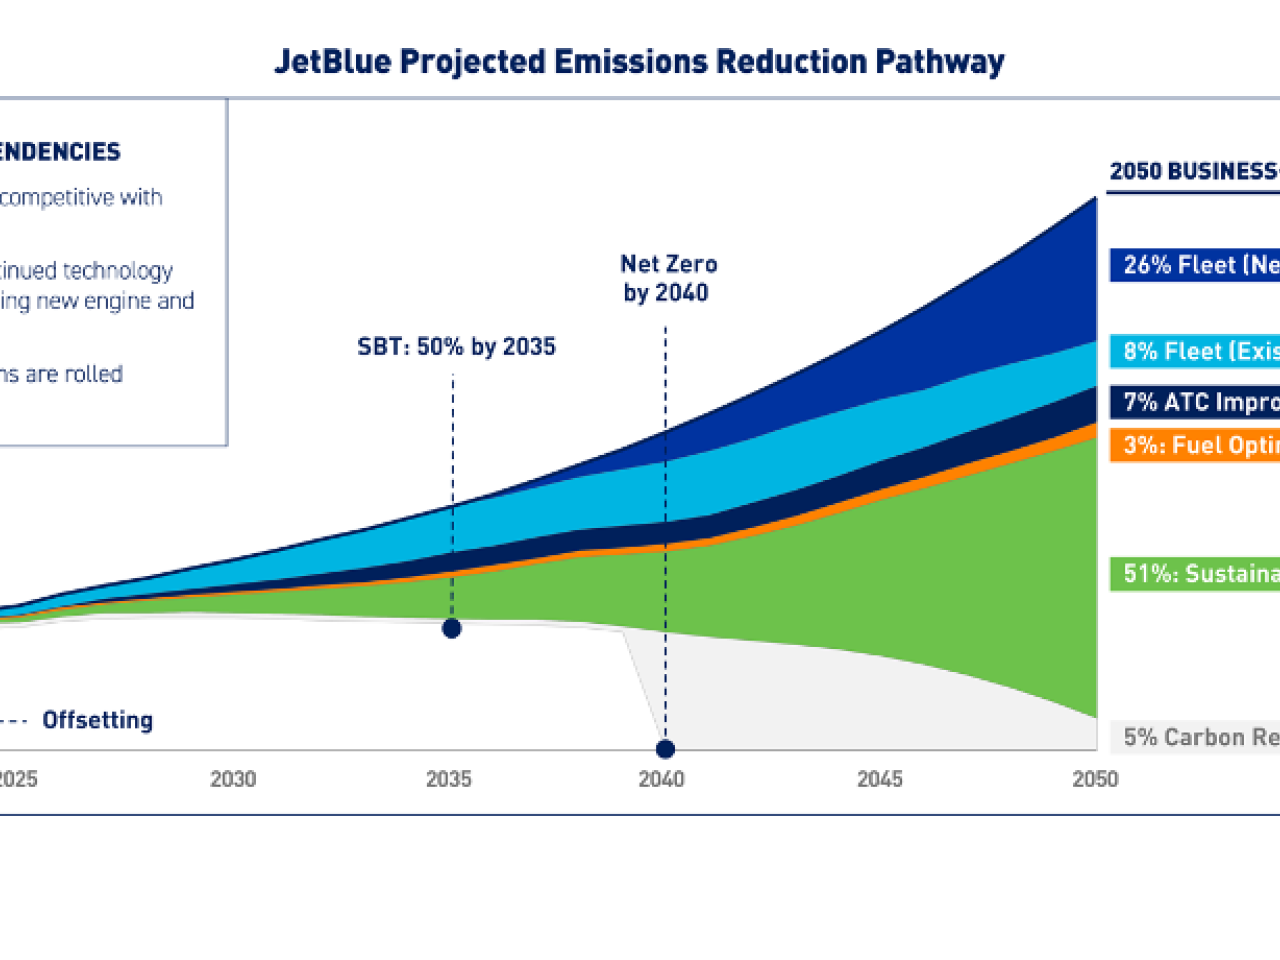 Info graphic chart "JetBlue Projected Emissions Reduction Pathway" From 2020-2050 and key external dependencies. Variables include Fleet, ATC improvements, fuel optimization, Sustainable aviation fuel, and carbon removals/offsets.